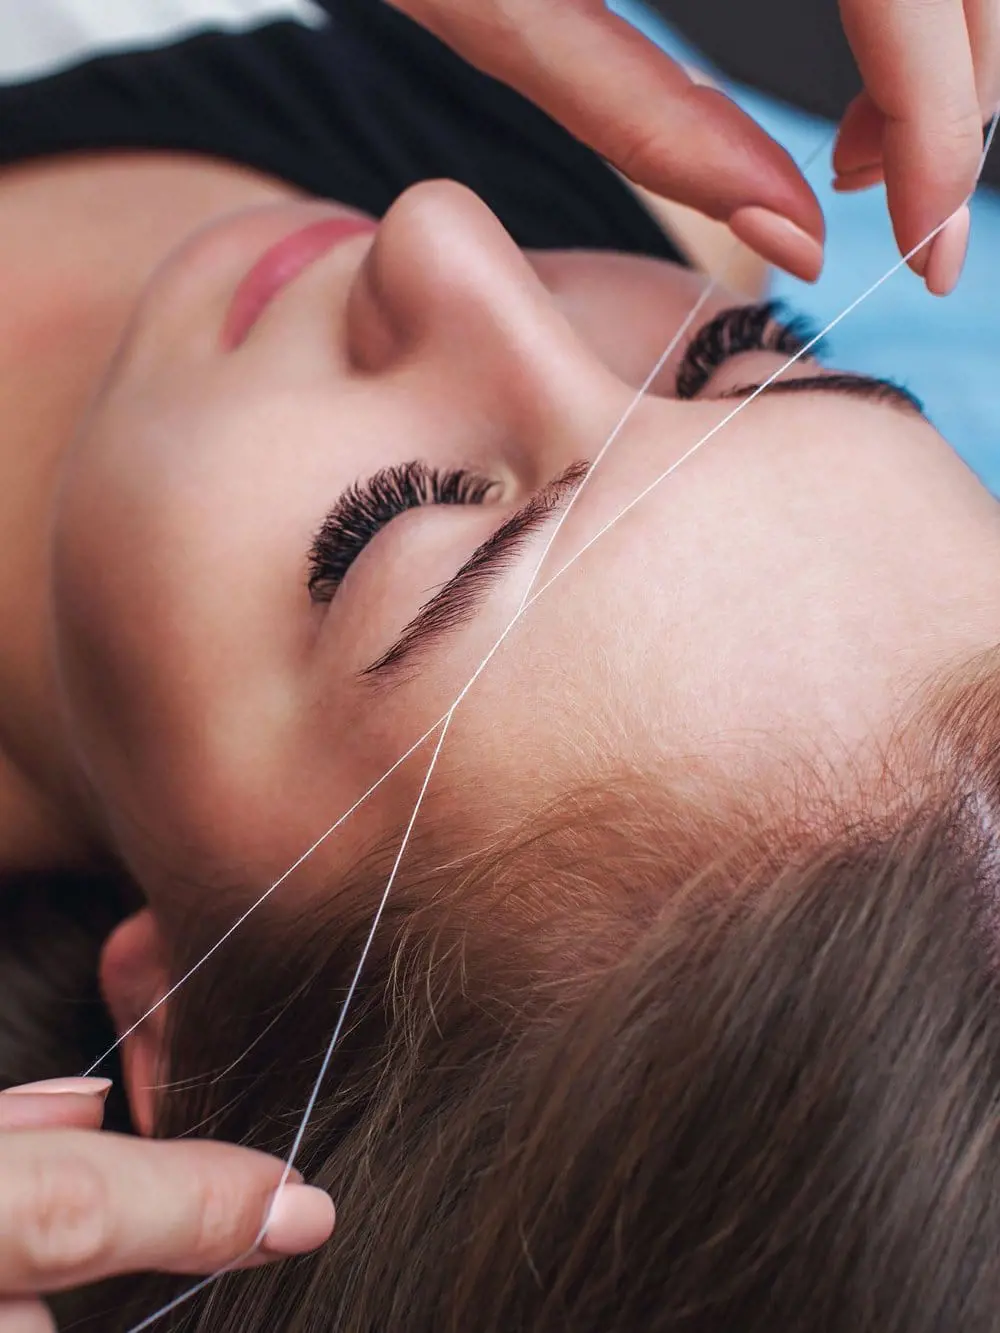 Brow Studio 31 offer different service, including eyebrow threading, body waxing, eyelash extensions, and facials